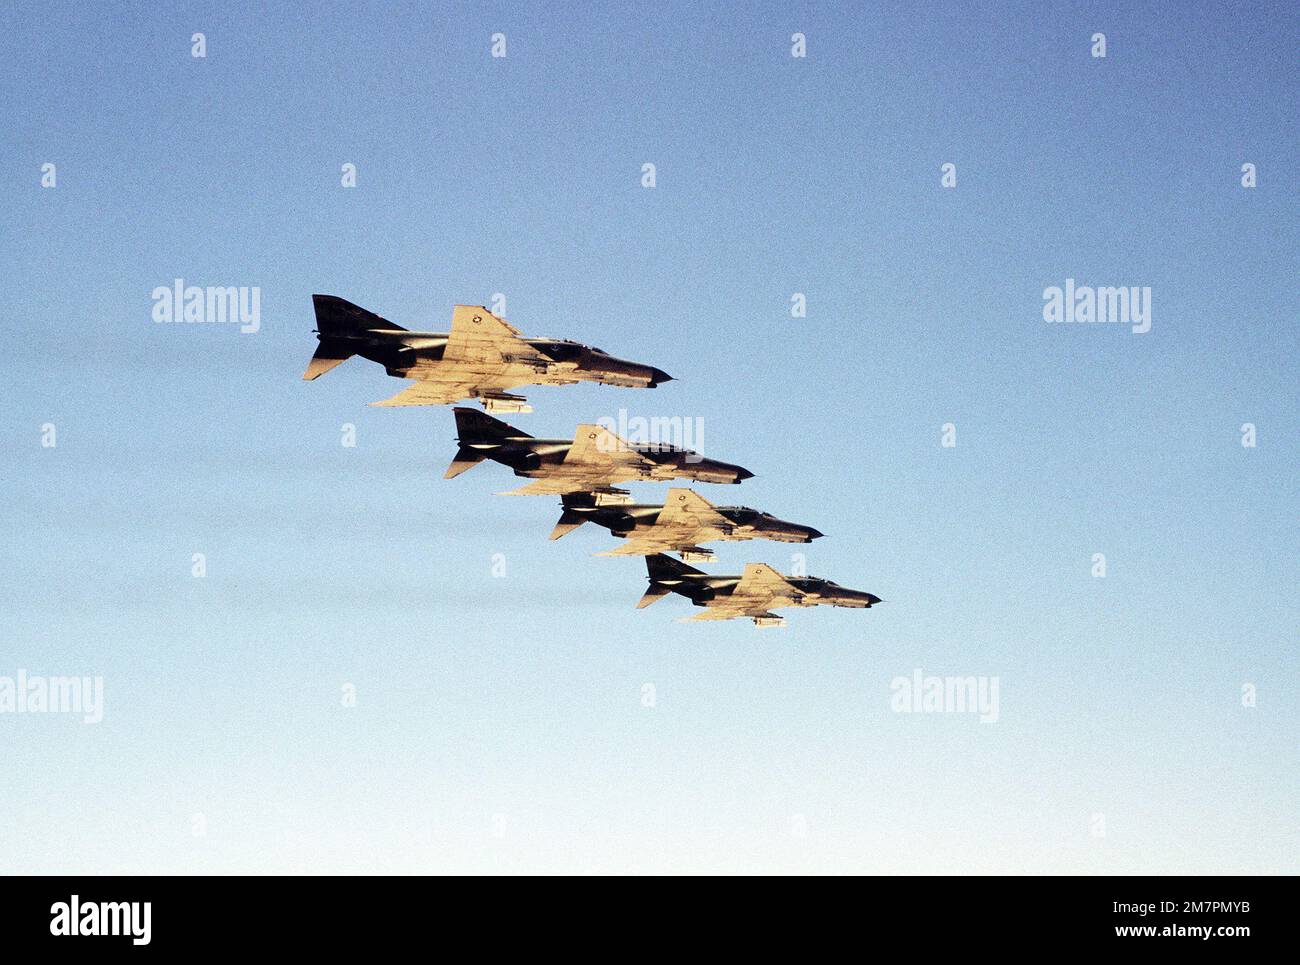 Four 70th Tactical Fighter Squadron F-4E Phantom II aircraft armed with AGM-65A Maverick missiles fly in formation during exercise Pround Phantom'80. Base: Cairo West Air Base State: Al Qahirah Country: Egypt (EGY) Stock Photo